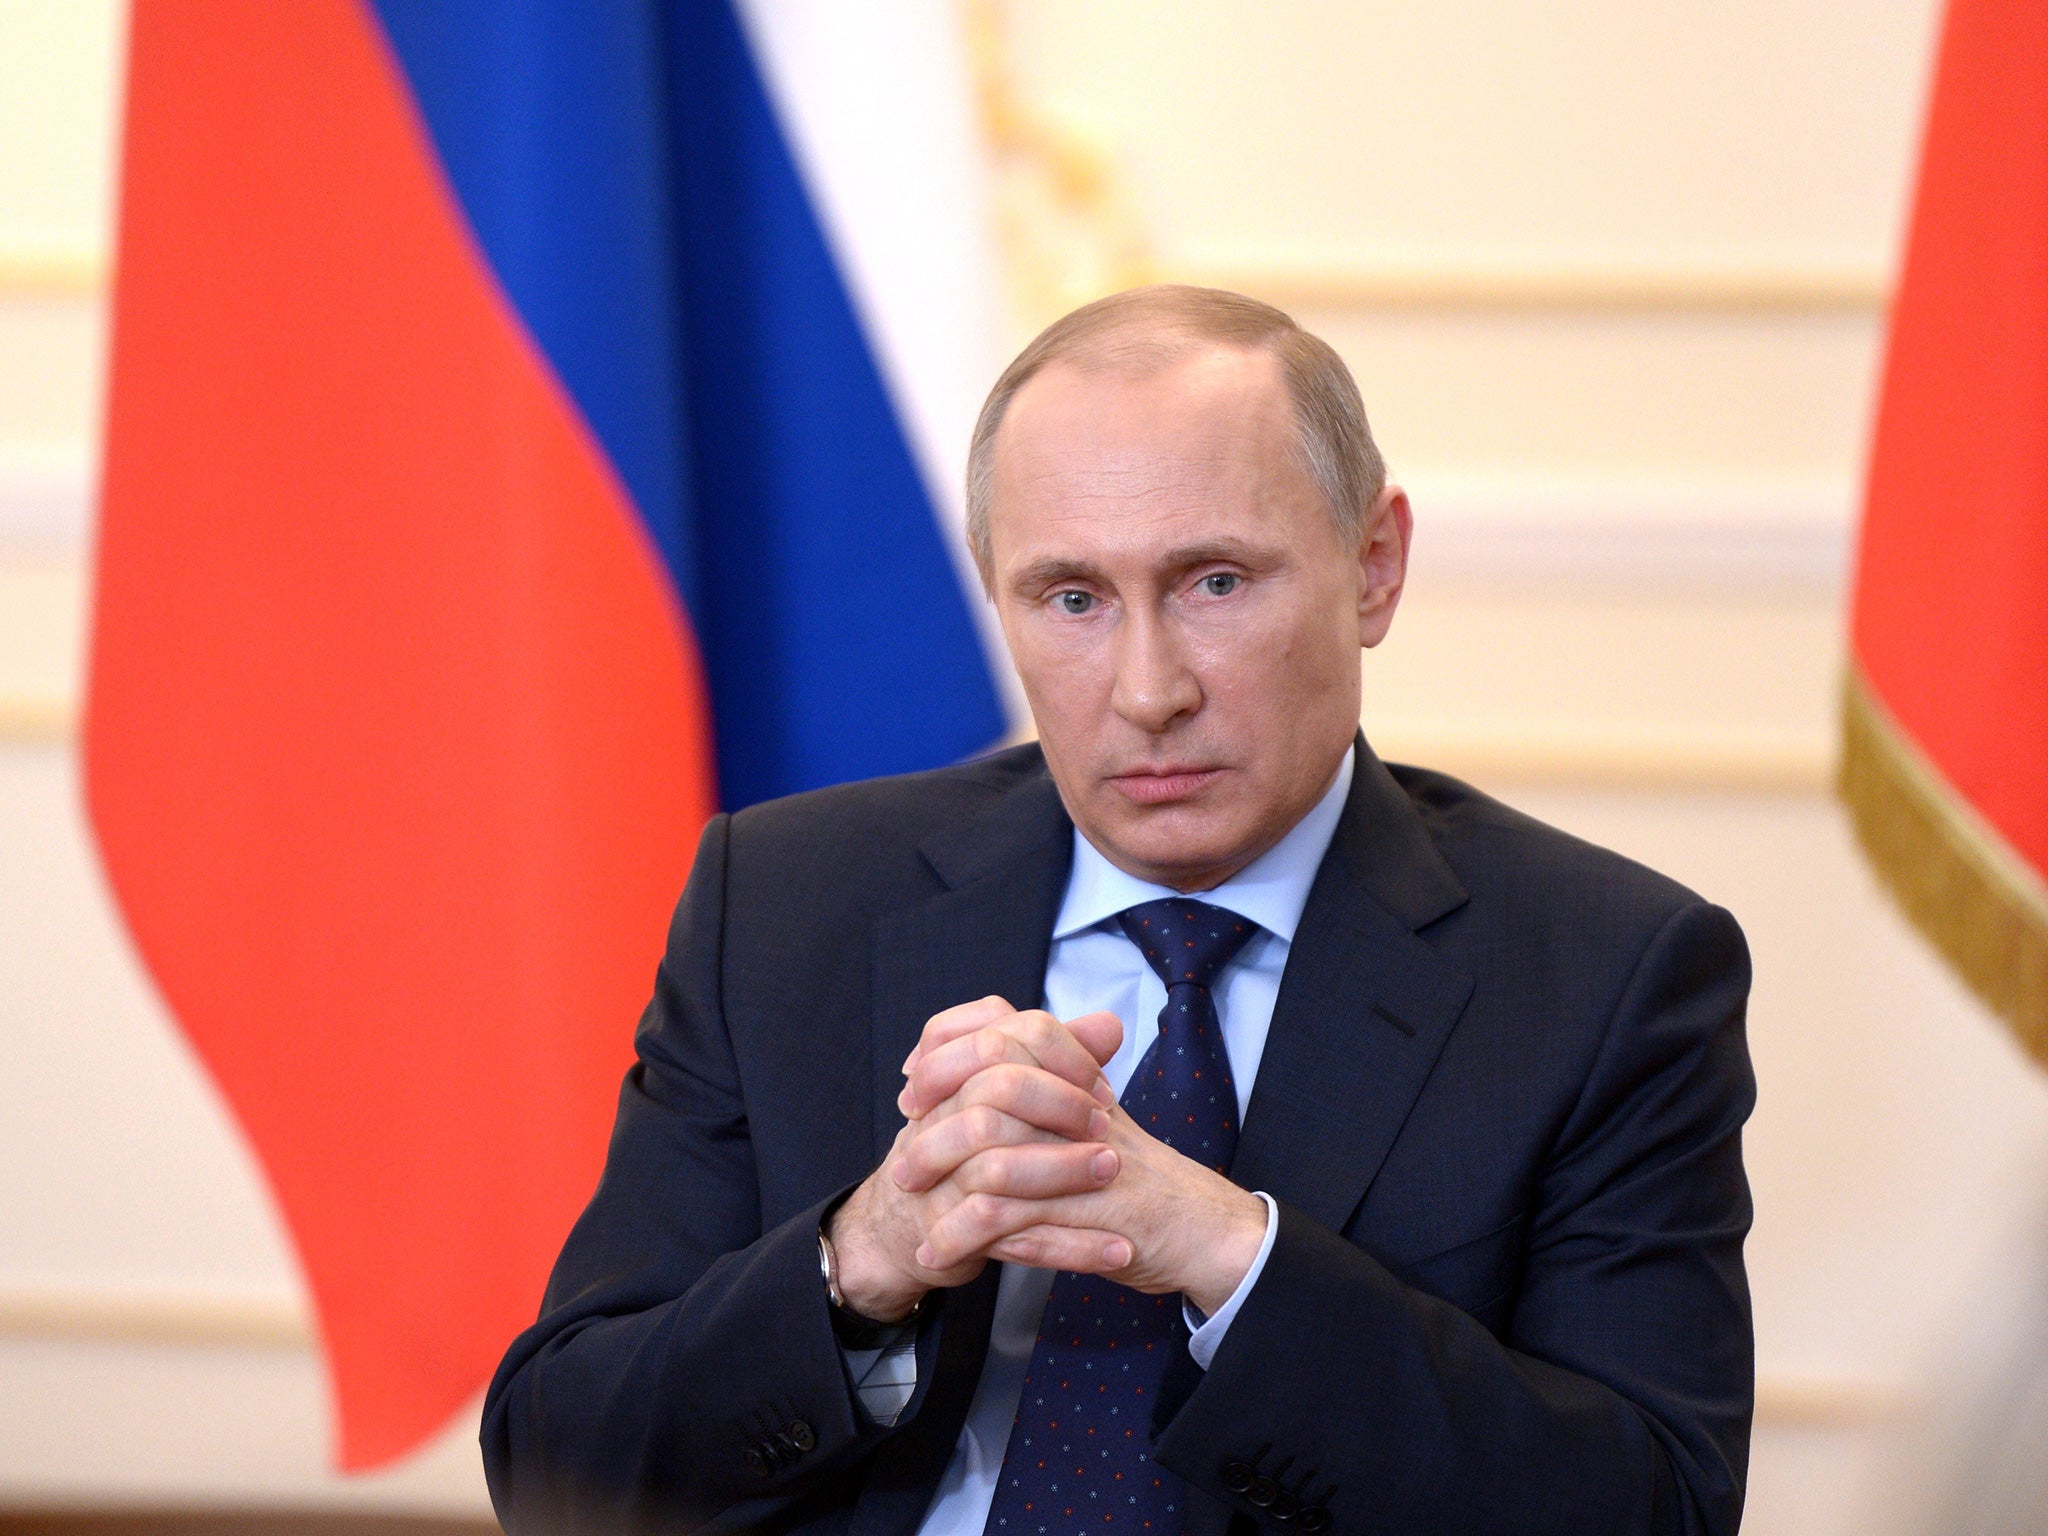 Mr Putin said that Russia has been unfairly targeted with sanctions